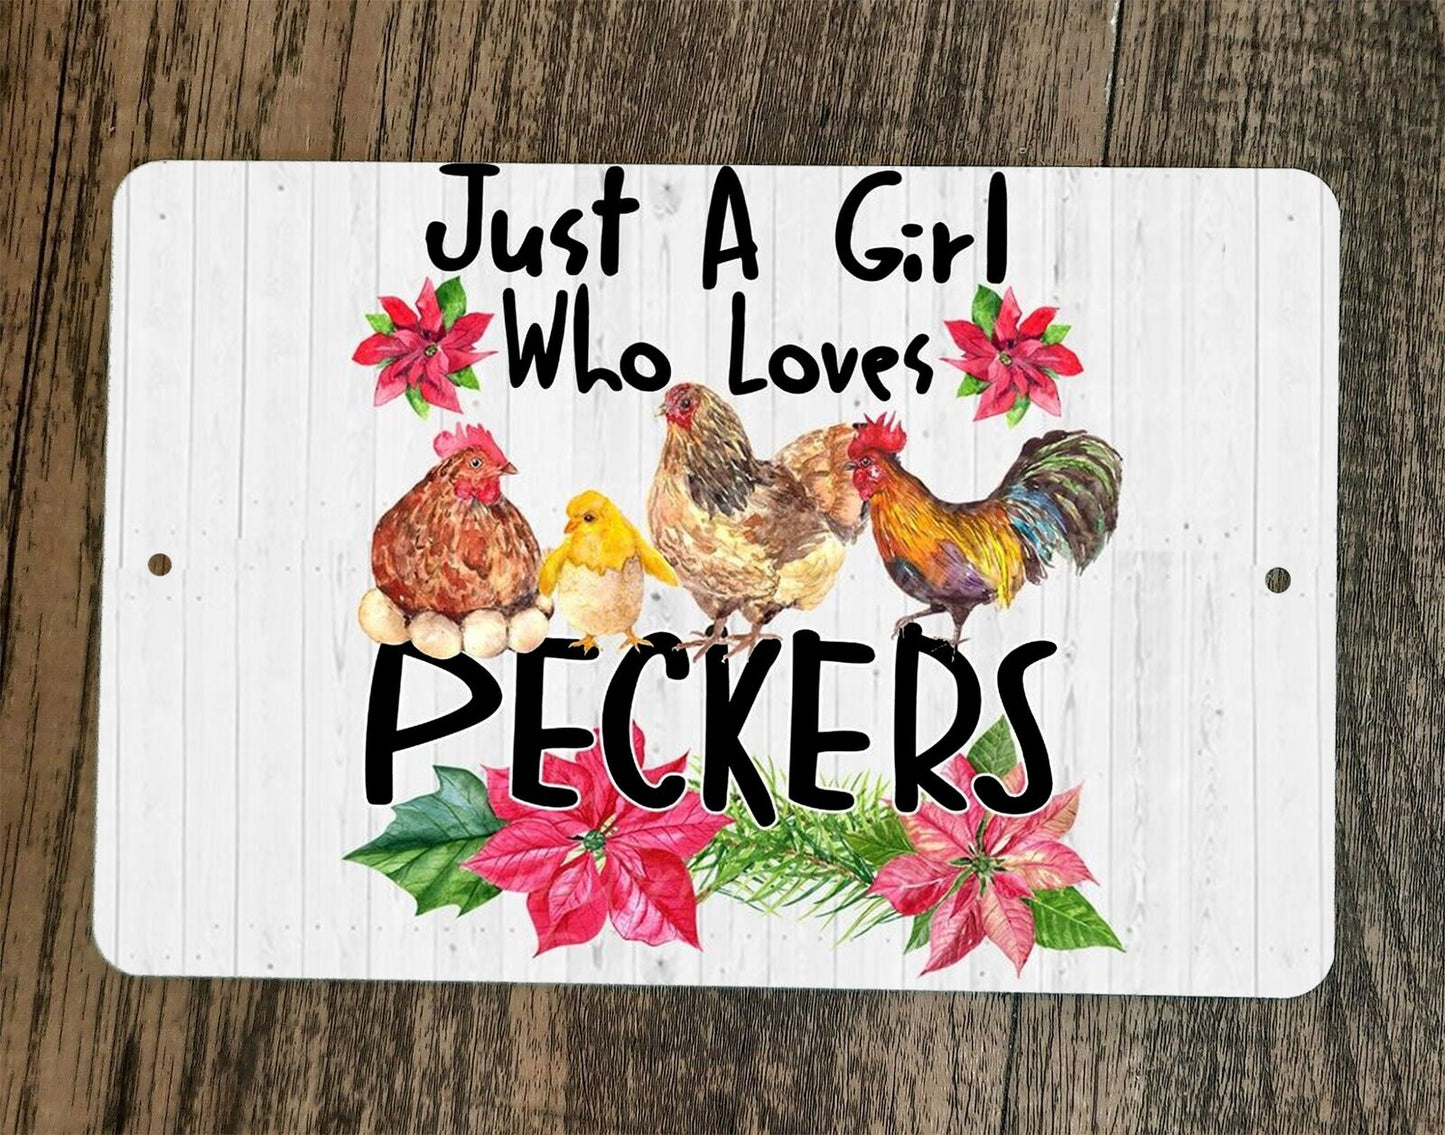 Just a Girl Who Loves Peckers 8x12 Metal Wall Sign Animal Chicken Poster